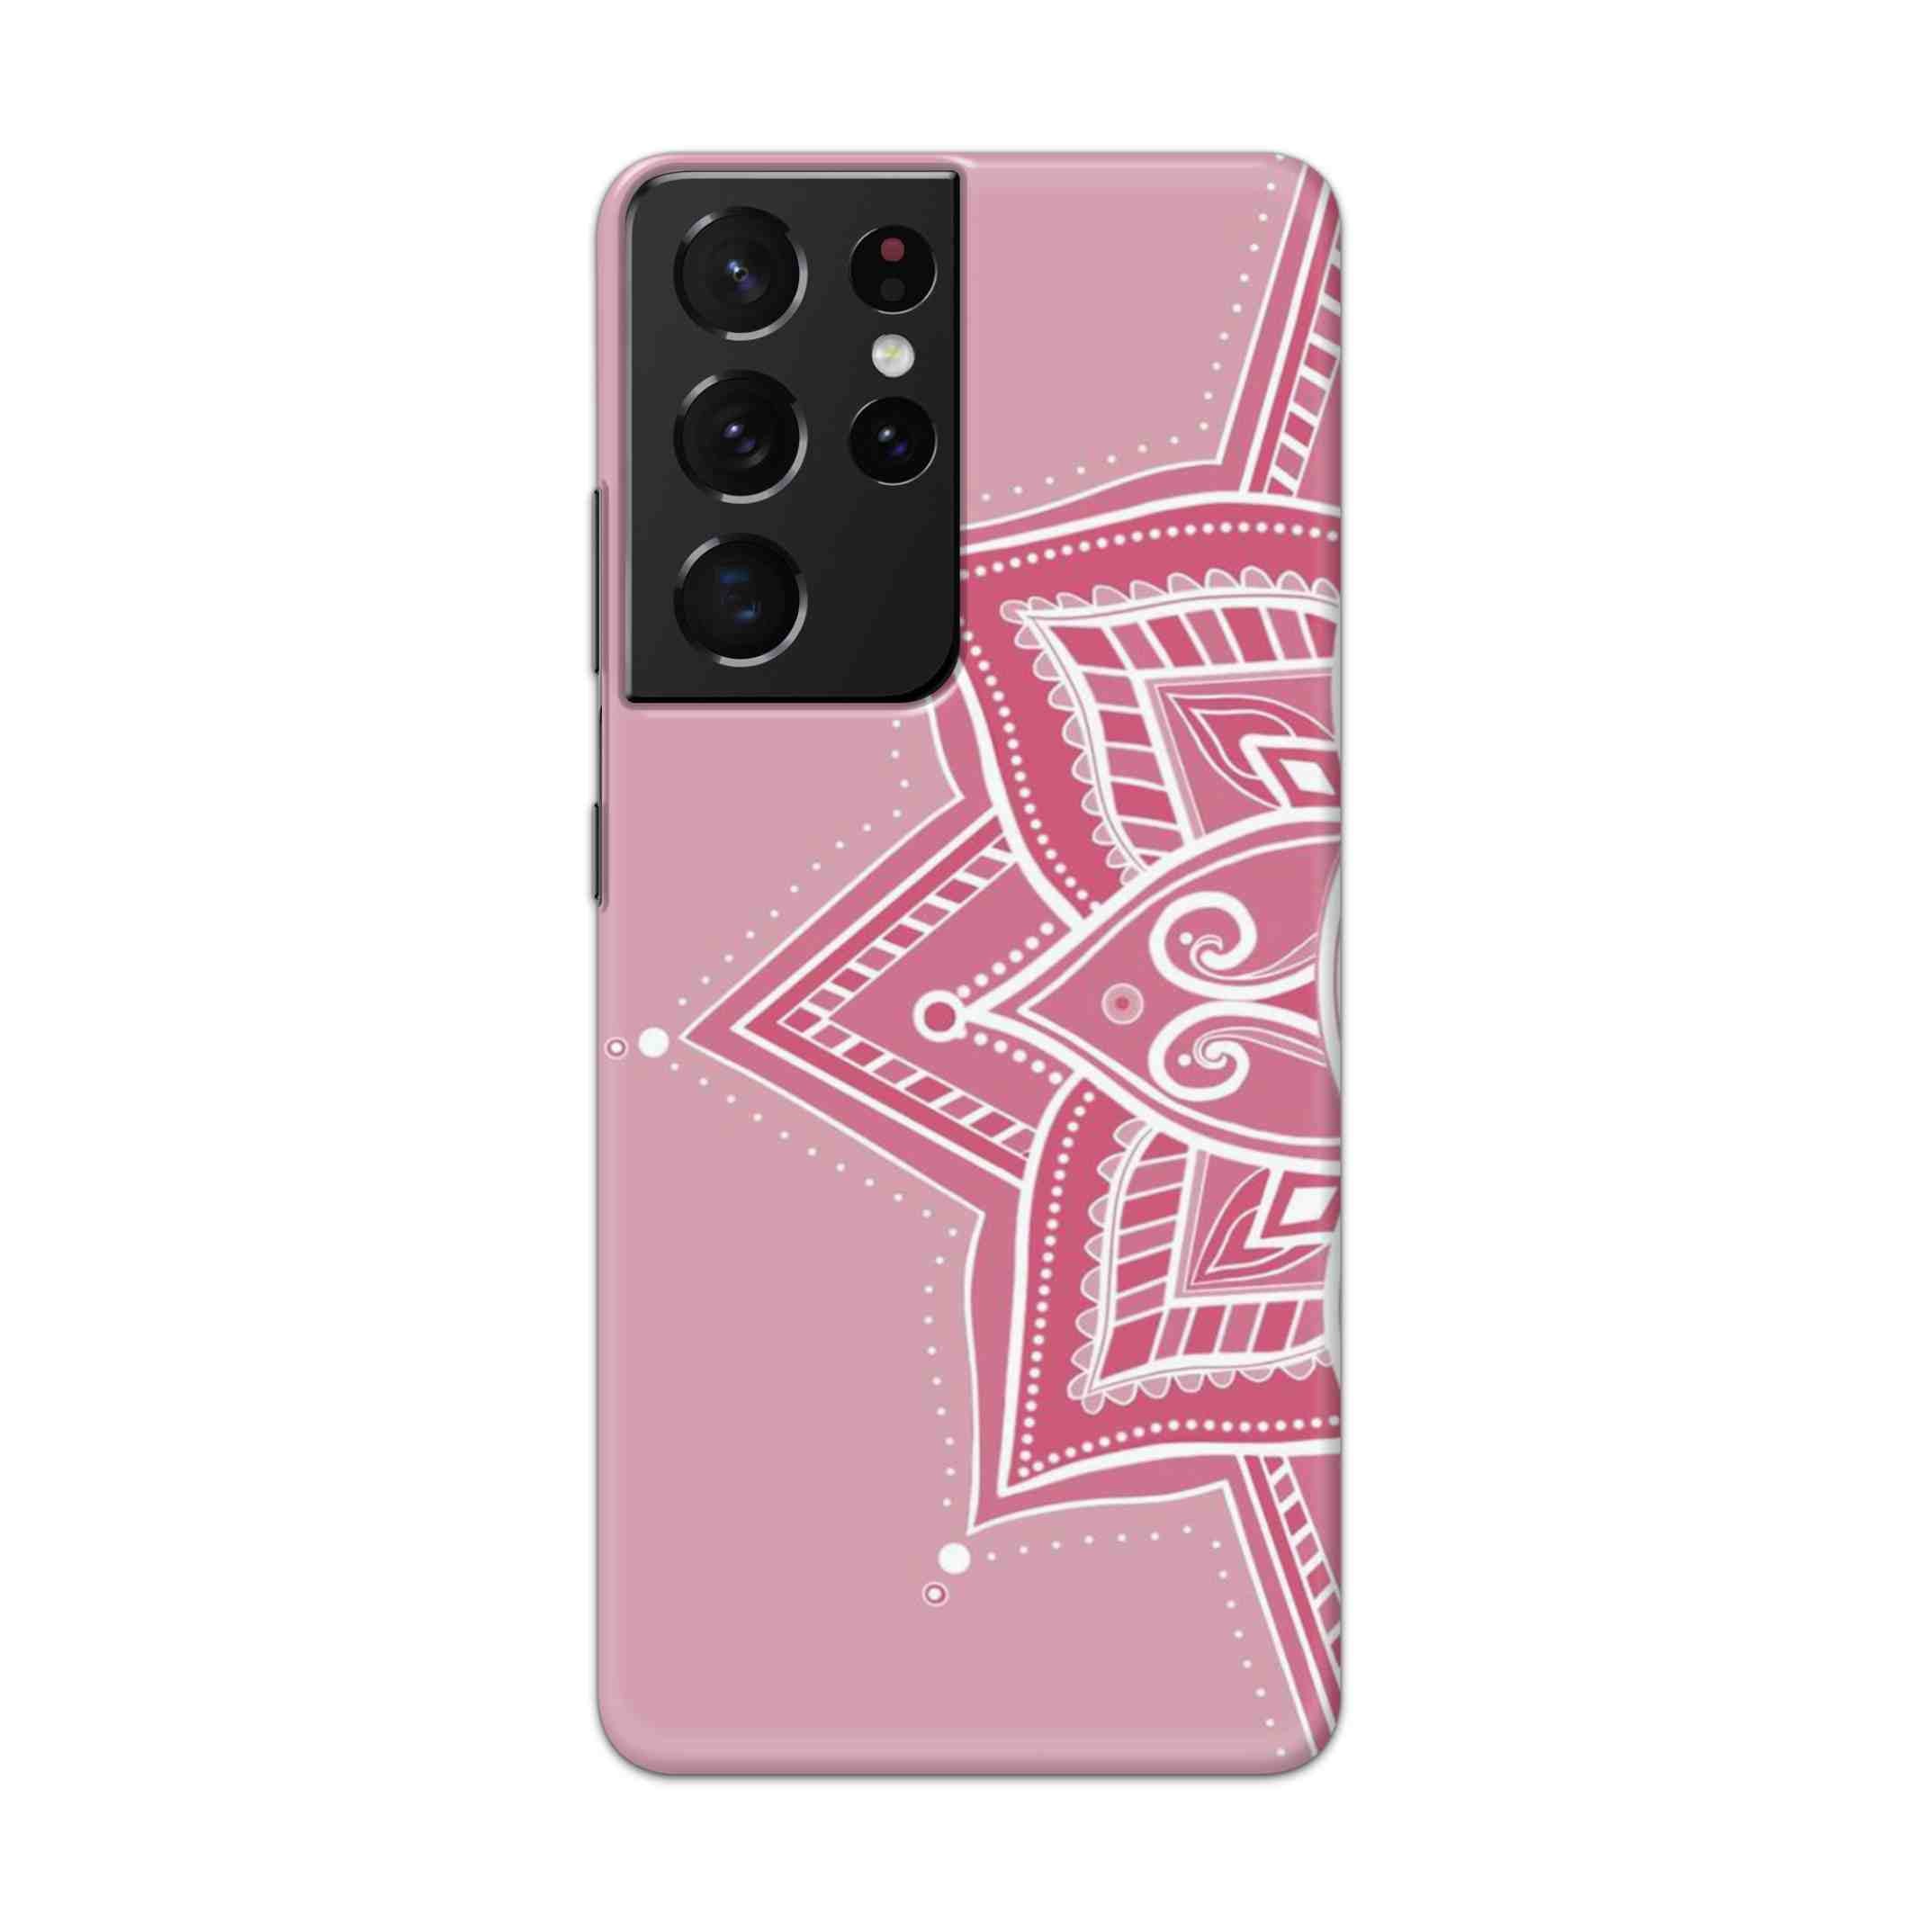 Buy Pink Rangoli Hard Back Mobile Phone Case Cover For Samsung Galaxy S21 Ultra Online